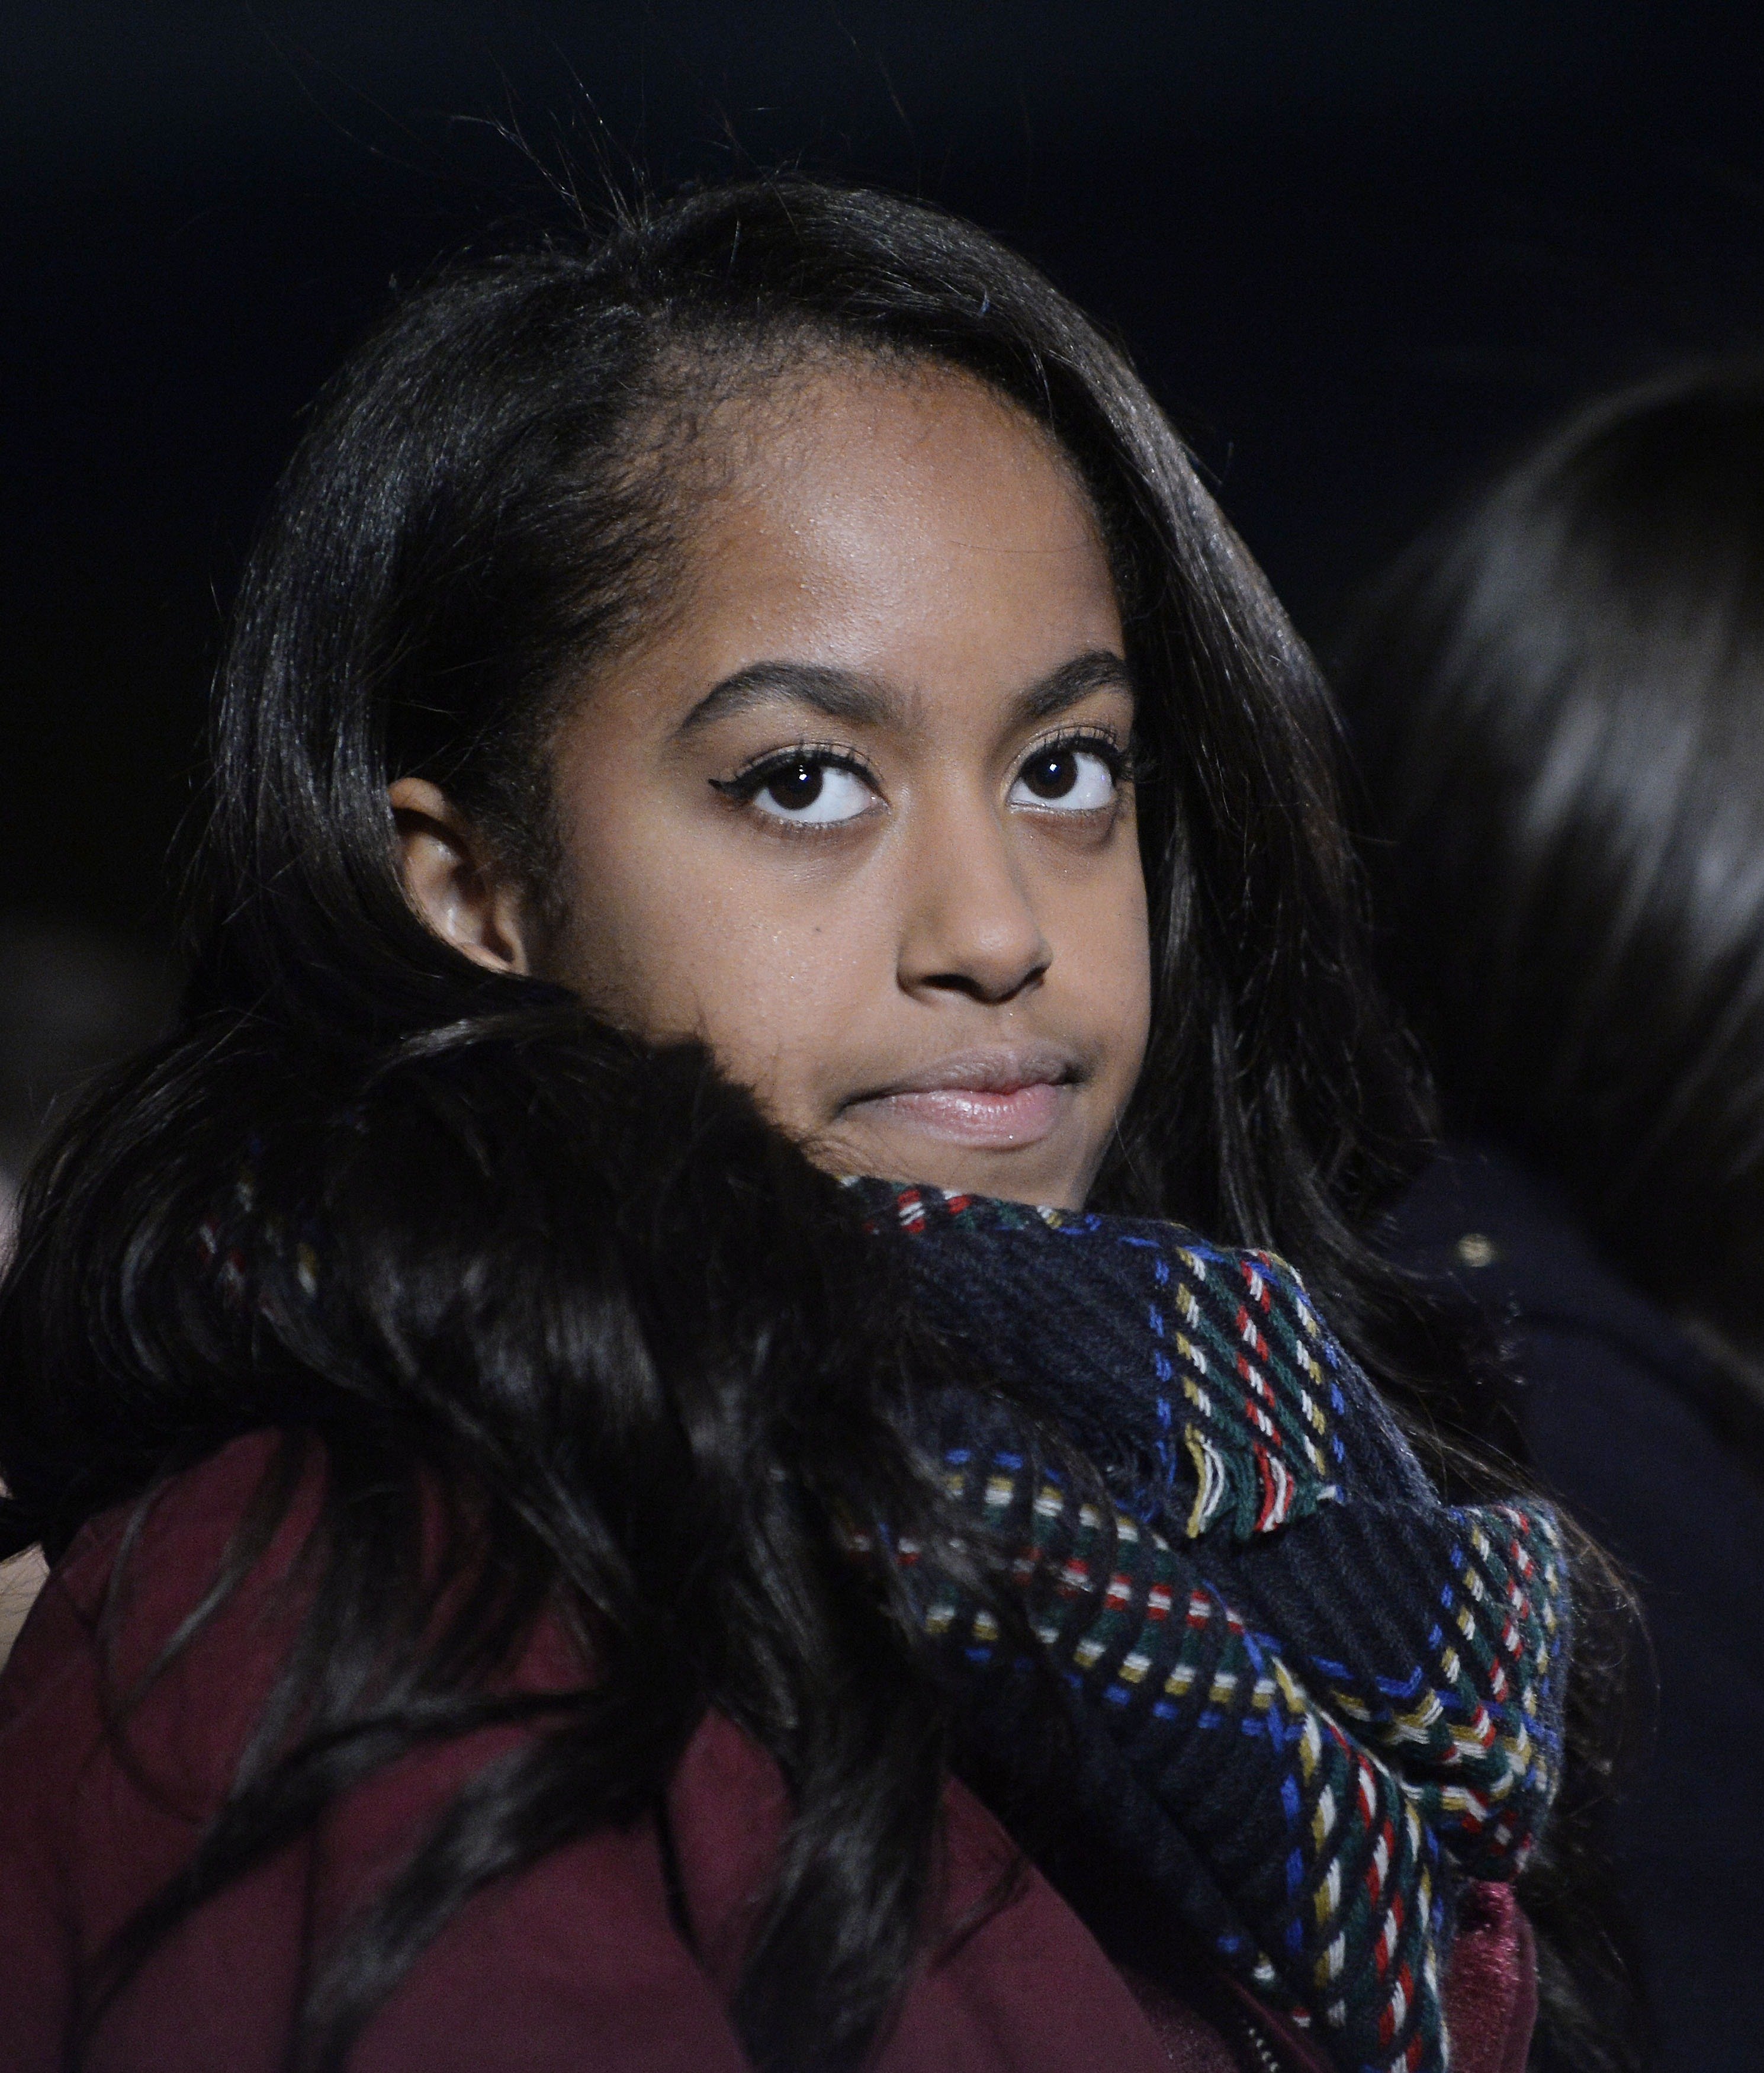  Malia Obama attends the national Christmas tree lighting ceremony in the White House. December, 2015. | Photo: GettyImages/Global Images of Ukraine